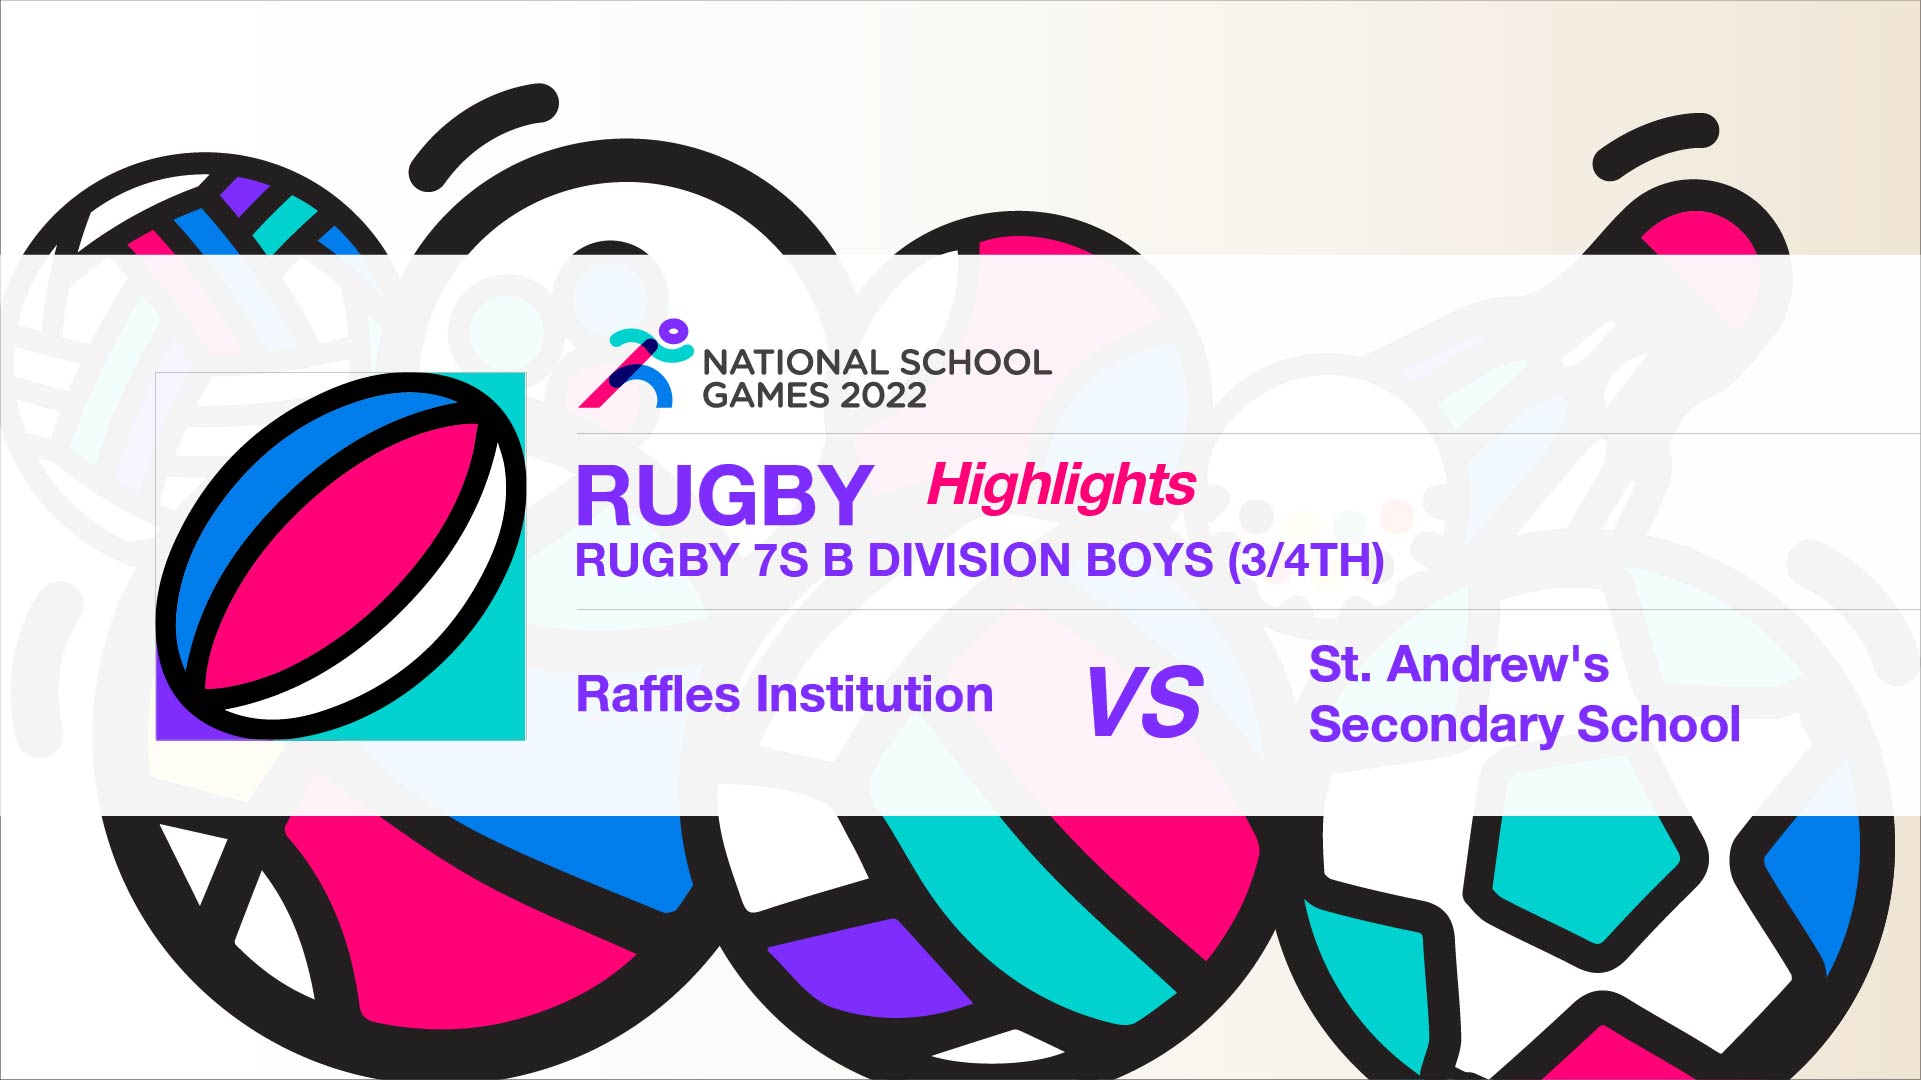 SSSC Rugby 7s B Division Boys 3rd/4th | Raffles Institution vs St. Andrew's Secondary School - Highlights